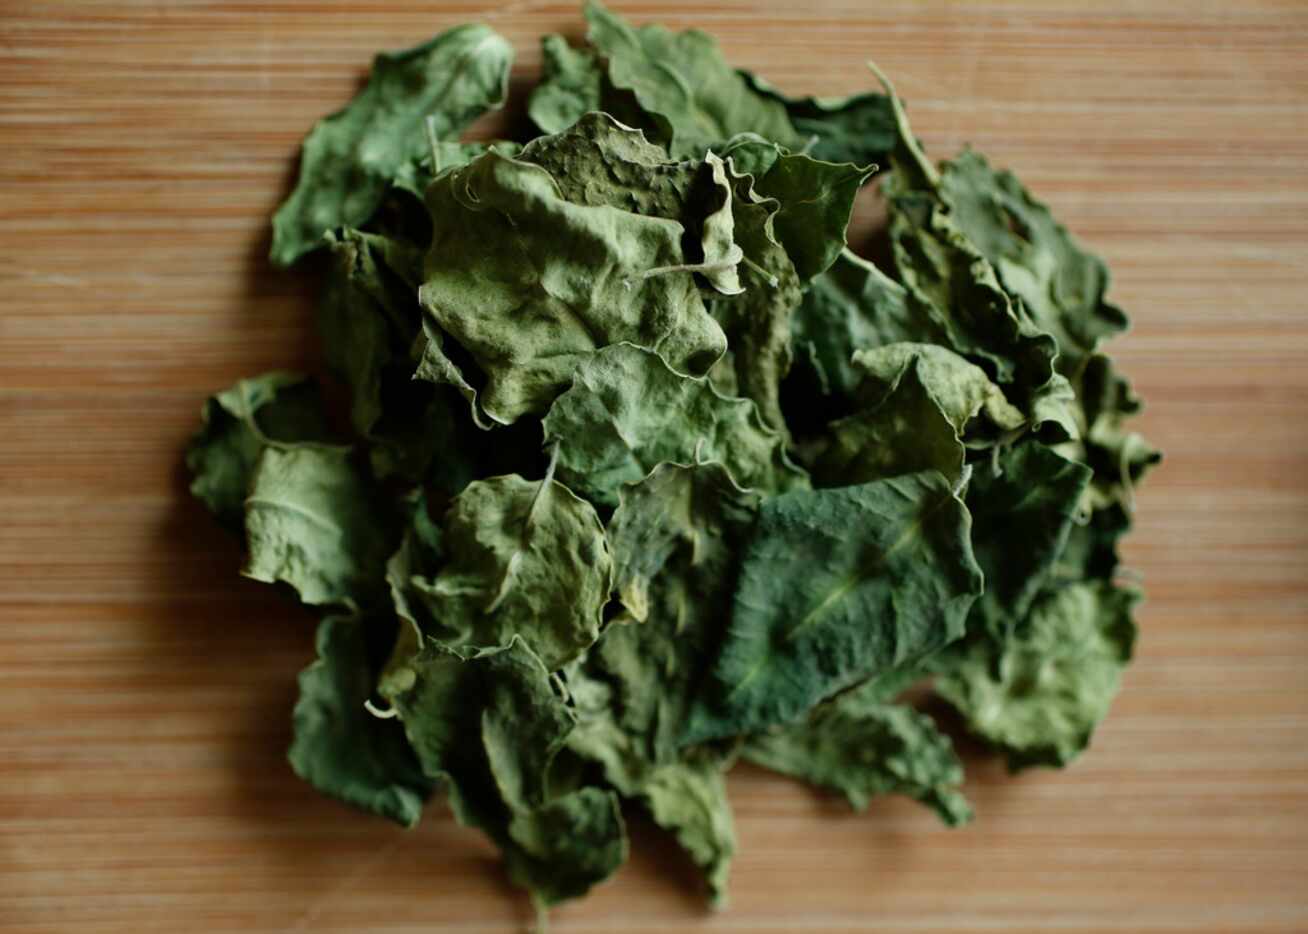 Moringa leaves, imported from Ethiopia